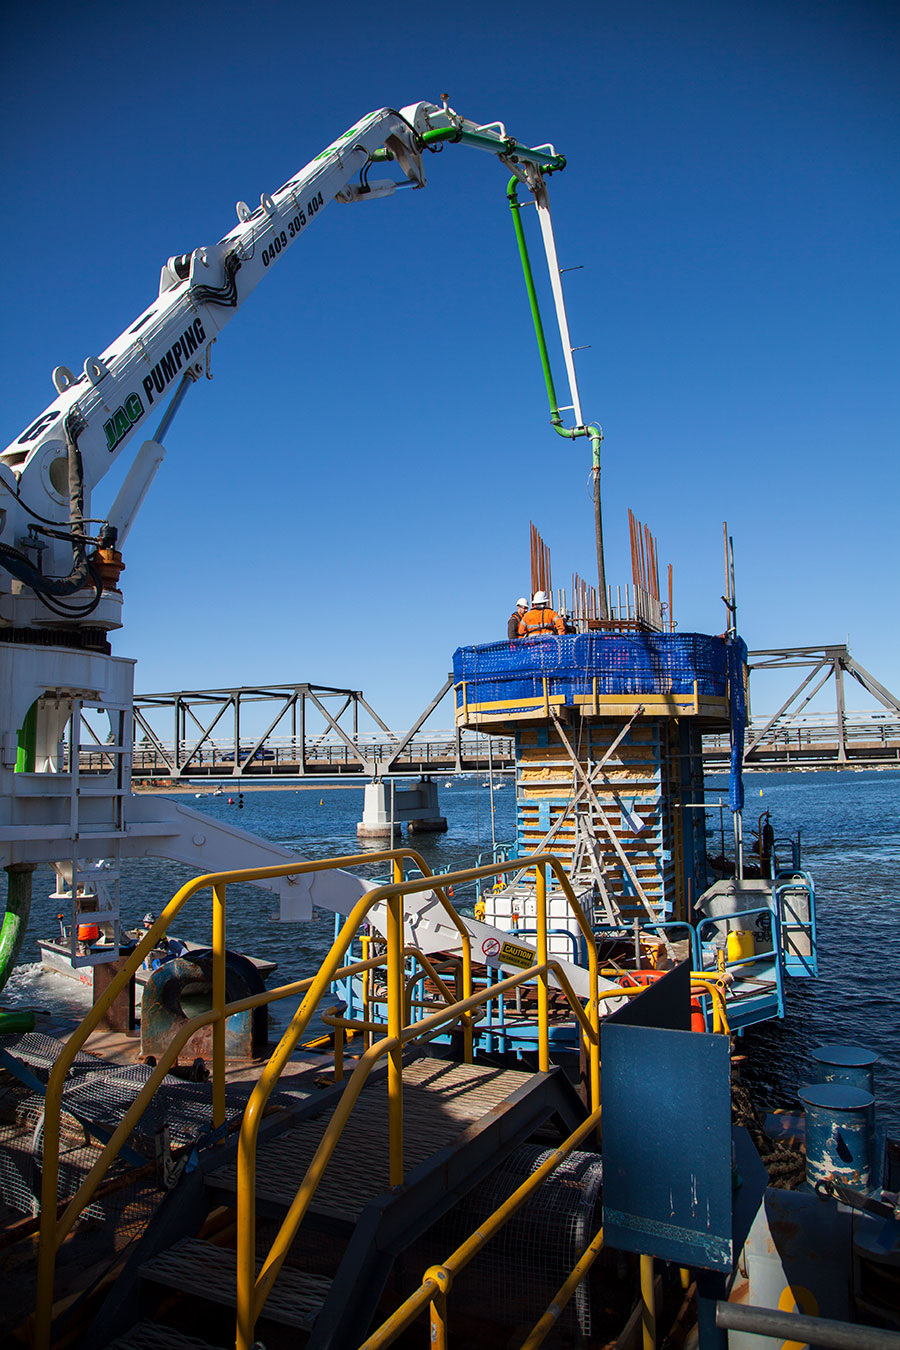 Pouring concrete for substructure on river via barge May 2020